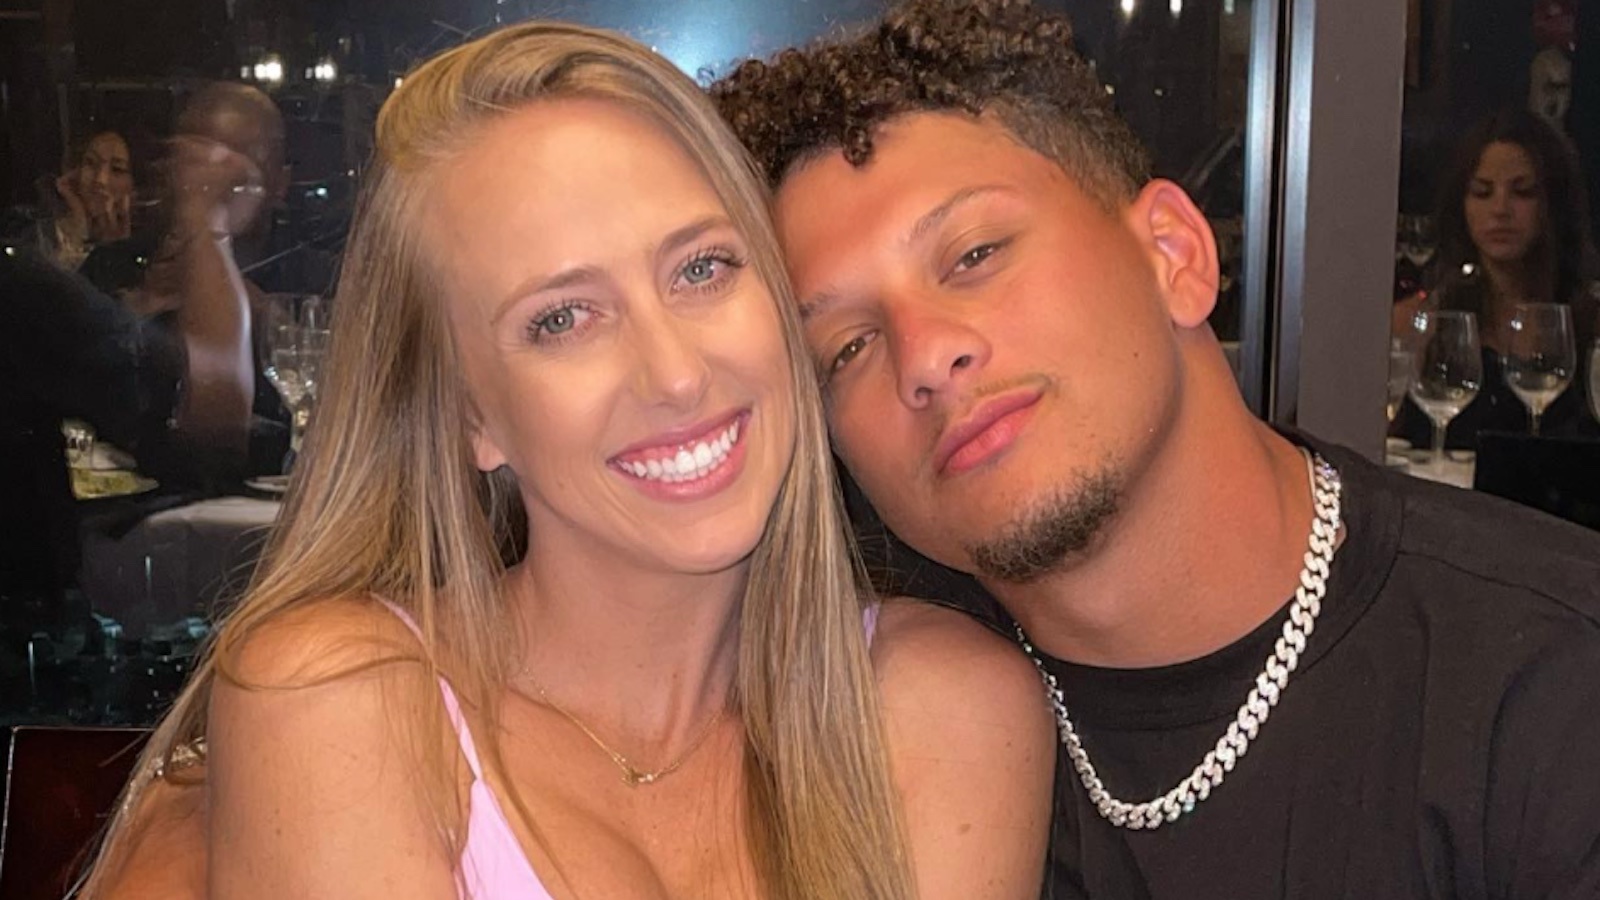 Patrick Mahomes' wife Brittany had very festive outfit for Super Bowl